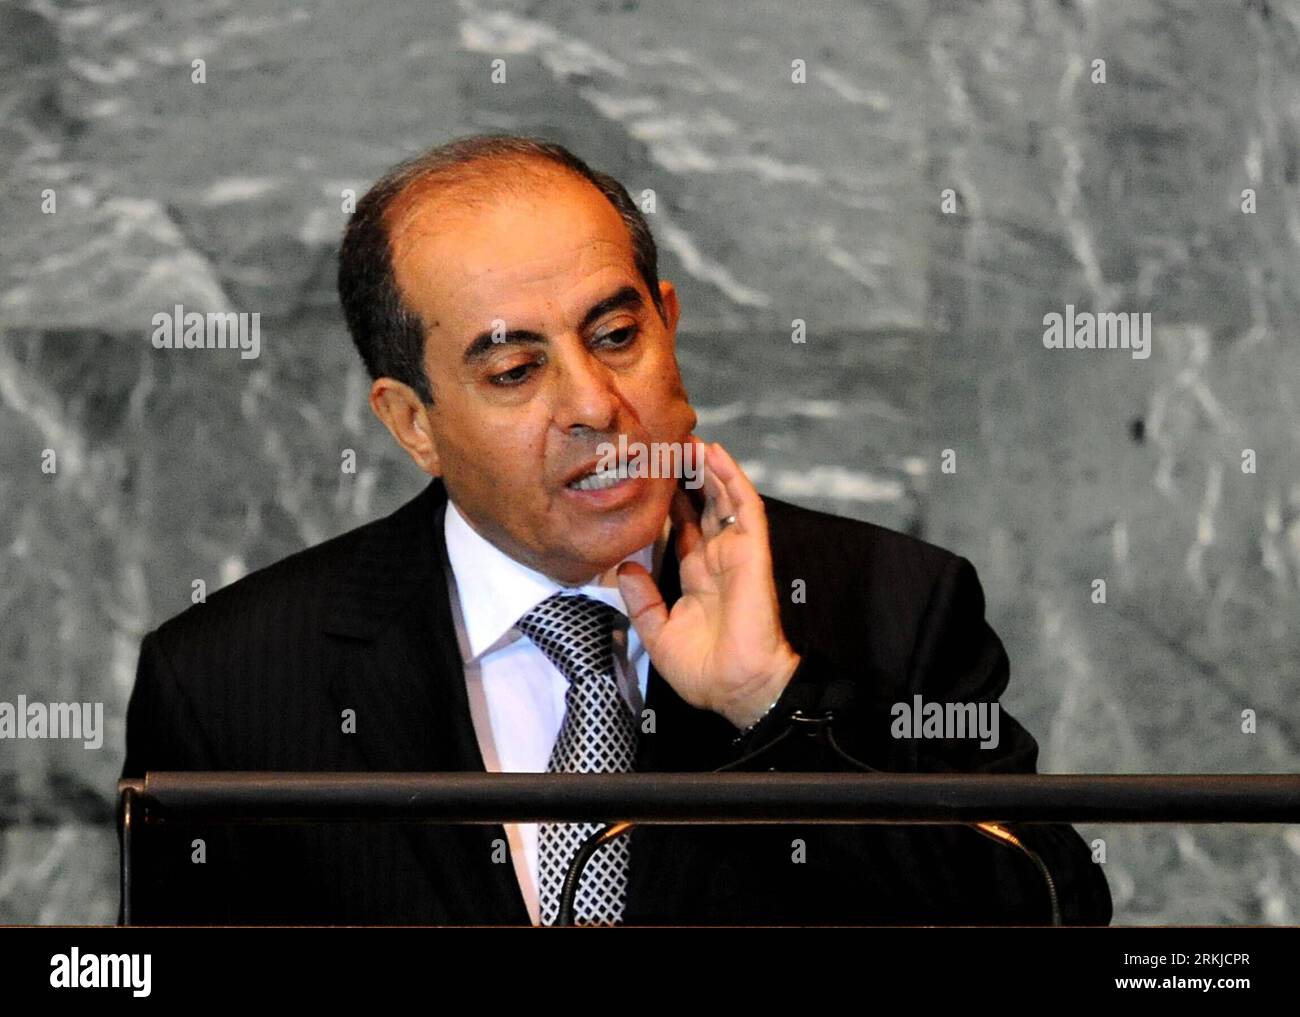 Bildnummer: 56101981  Datum: 24.09.2011  Copyright: imago/Xinhua (110924) -- NEW YORK, Sept. 24, 2011 (Xinhua) -- Mahmoud Jibril, Chairman of the National Transitional Council Executive Office of Libya, speaks during the General Debate of the 66th United Nations General Assembly session at the UN headquarters in New York, the United States, Sept. 24, 2011. (Xinhua/Shen Hong) (wjd) UN-GENERAL DEBATE-LIBYA PUBLICATIONxNOTxINxCHN People Politik Vereinte Nationen Generalversammlung Generaldebatte Porträt xjh x0x premiumd 2011 quer      56101981 Date 24 09 2011 Copyright Imago XINHUA  New York Sept Stock Photo